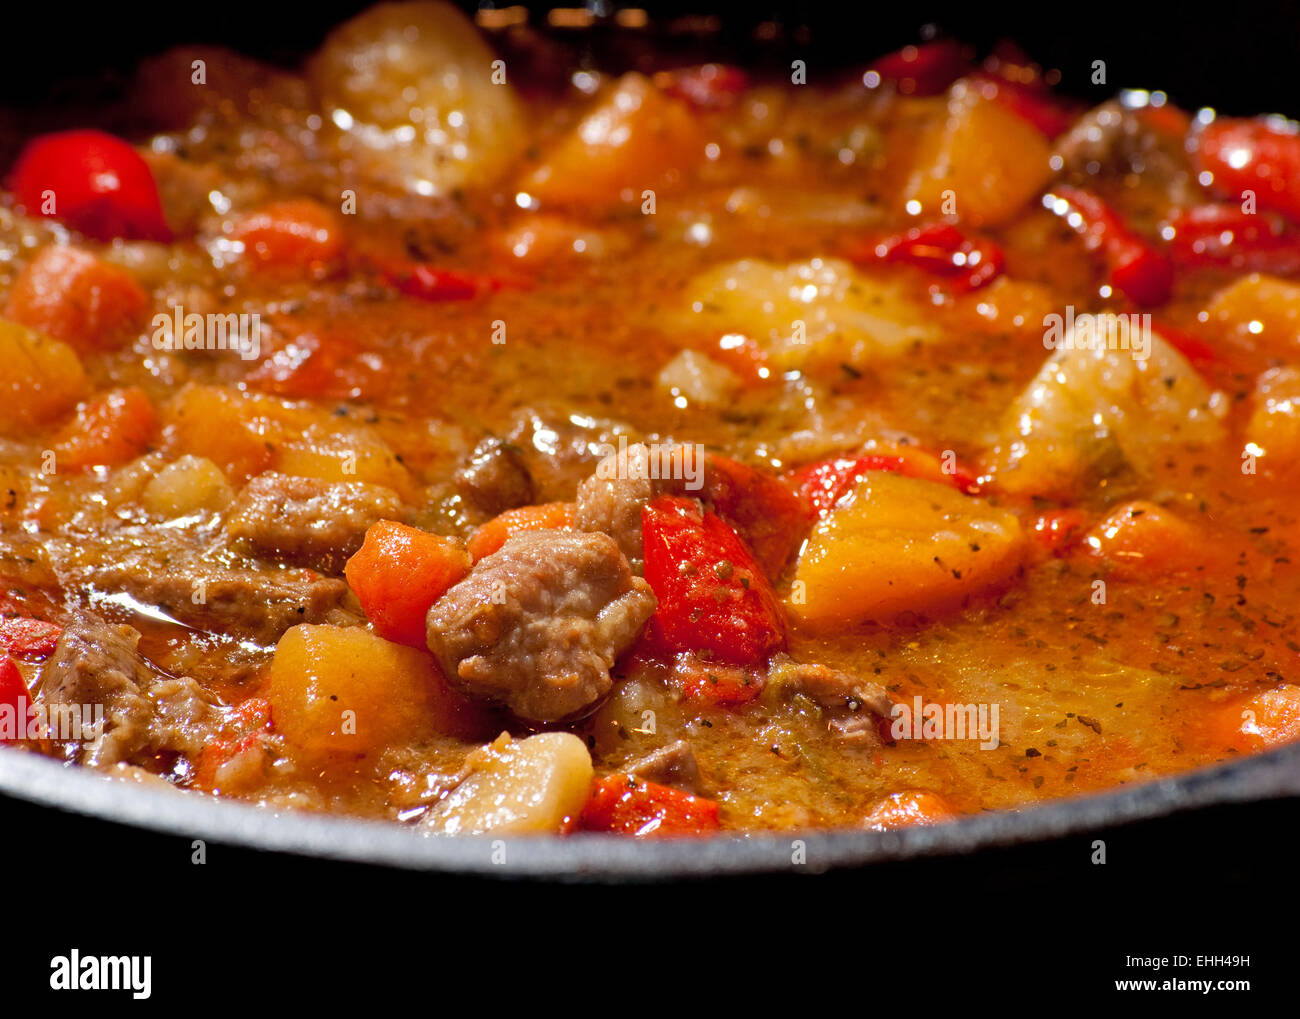 Meat and vegetable stew cooking in a black cast iron pot Stock Photo